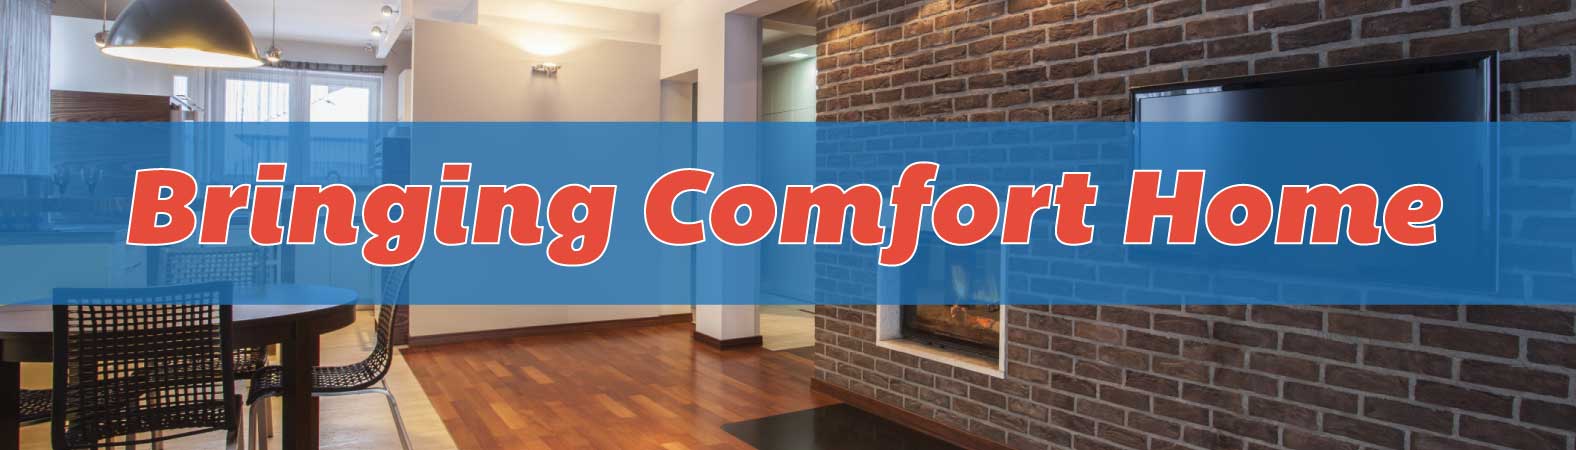 Bringing Comfort Home with high efficiency comfort systems!